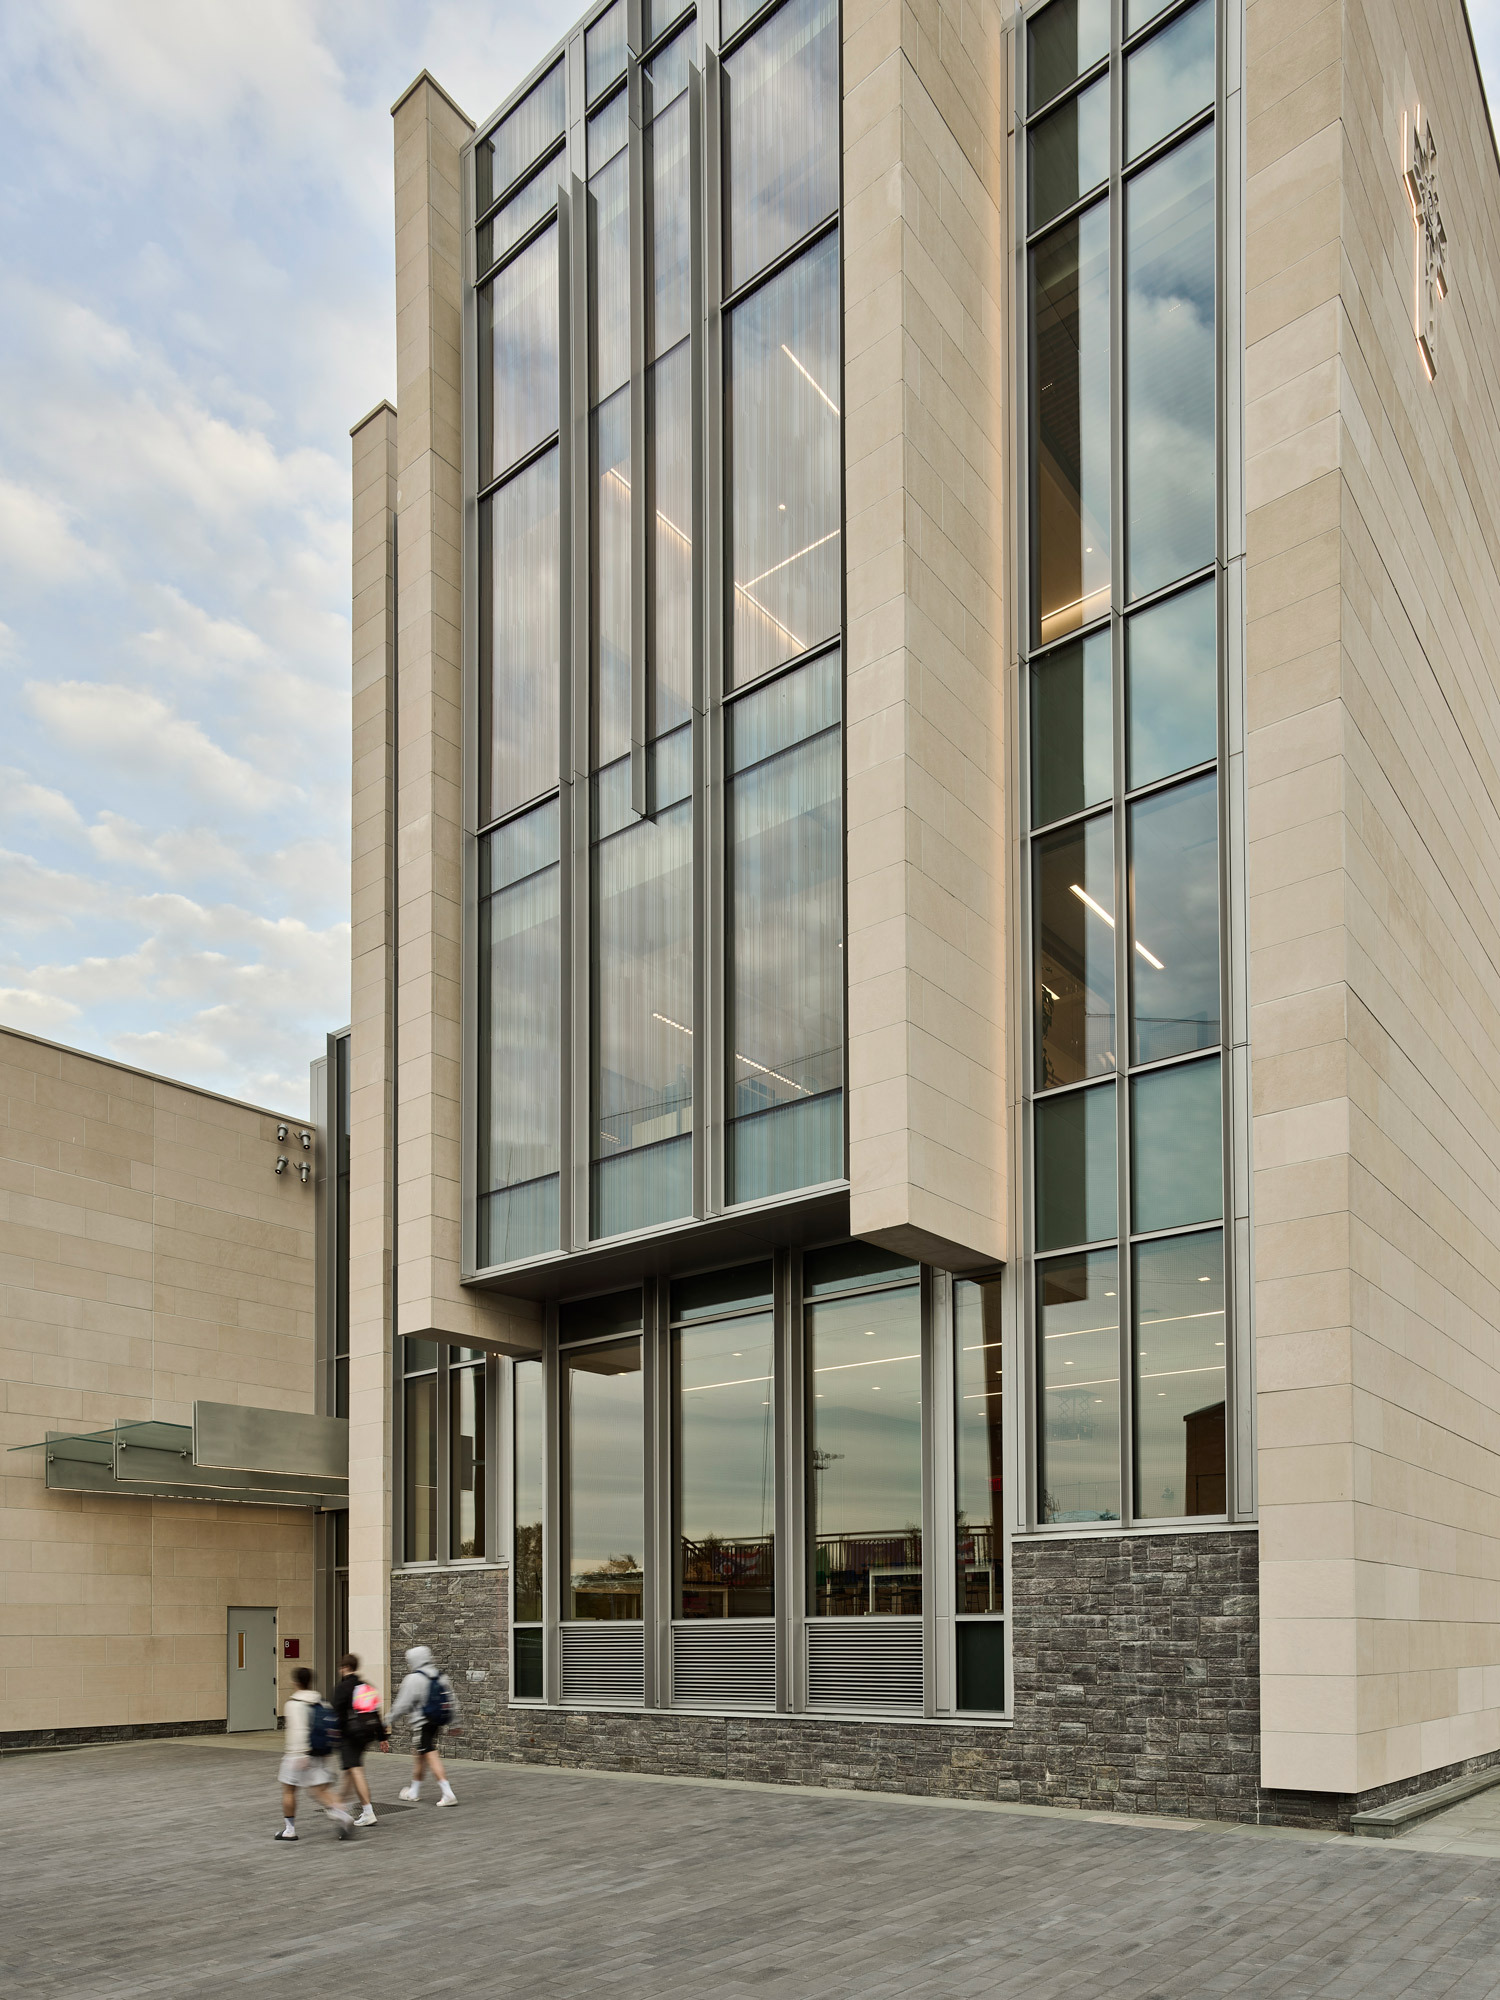 Modern glass-walled building with vertical and horizontal metal accents, featuring a rhythmic facade and an overhanging section for dynamic architectural interest, under a cloudy sky with pedestrians walking by.